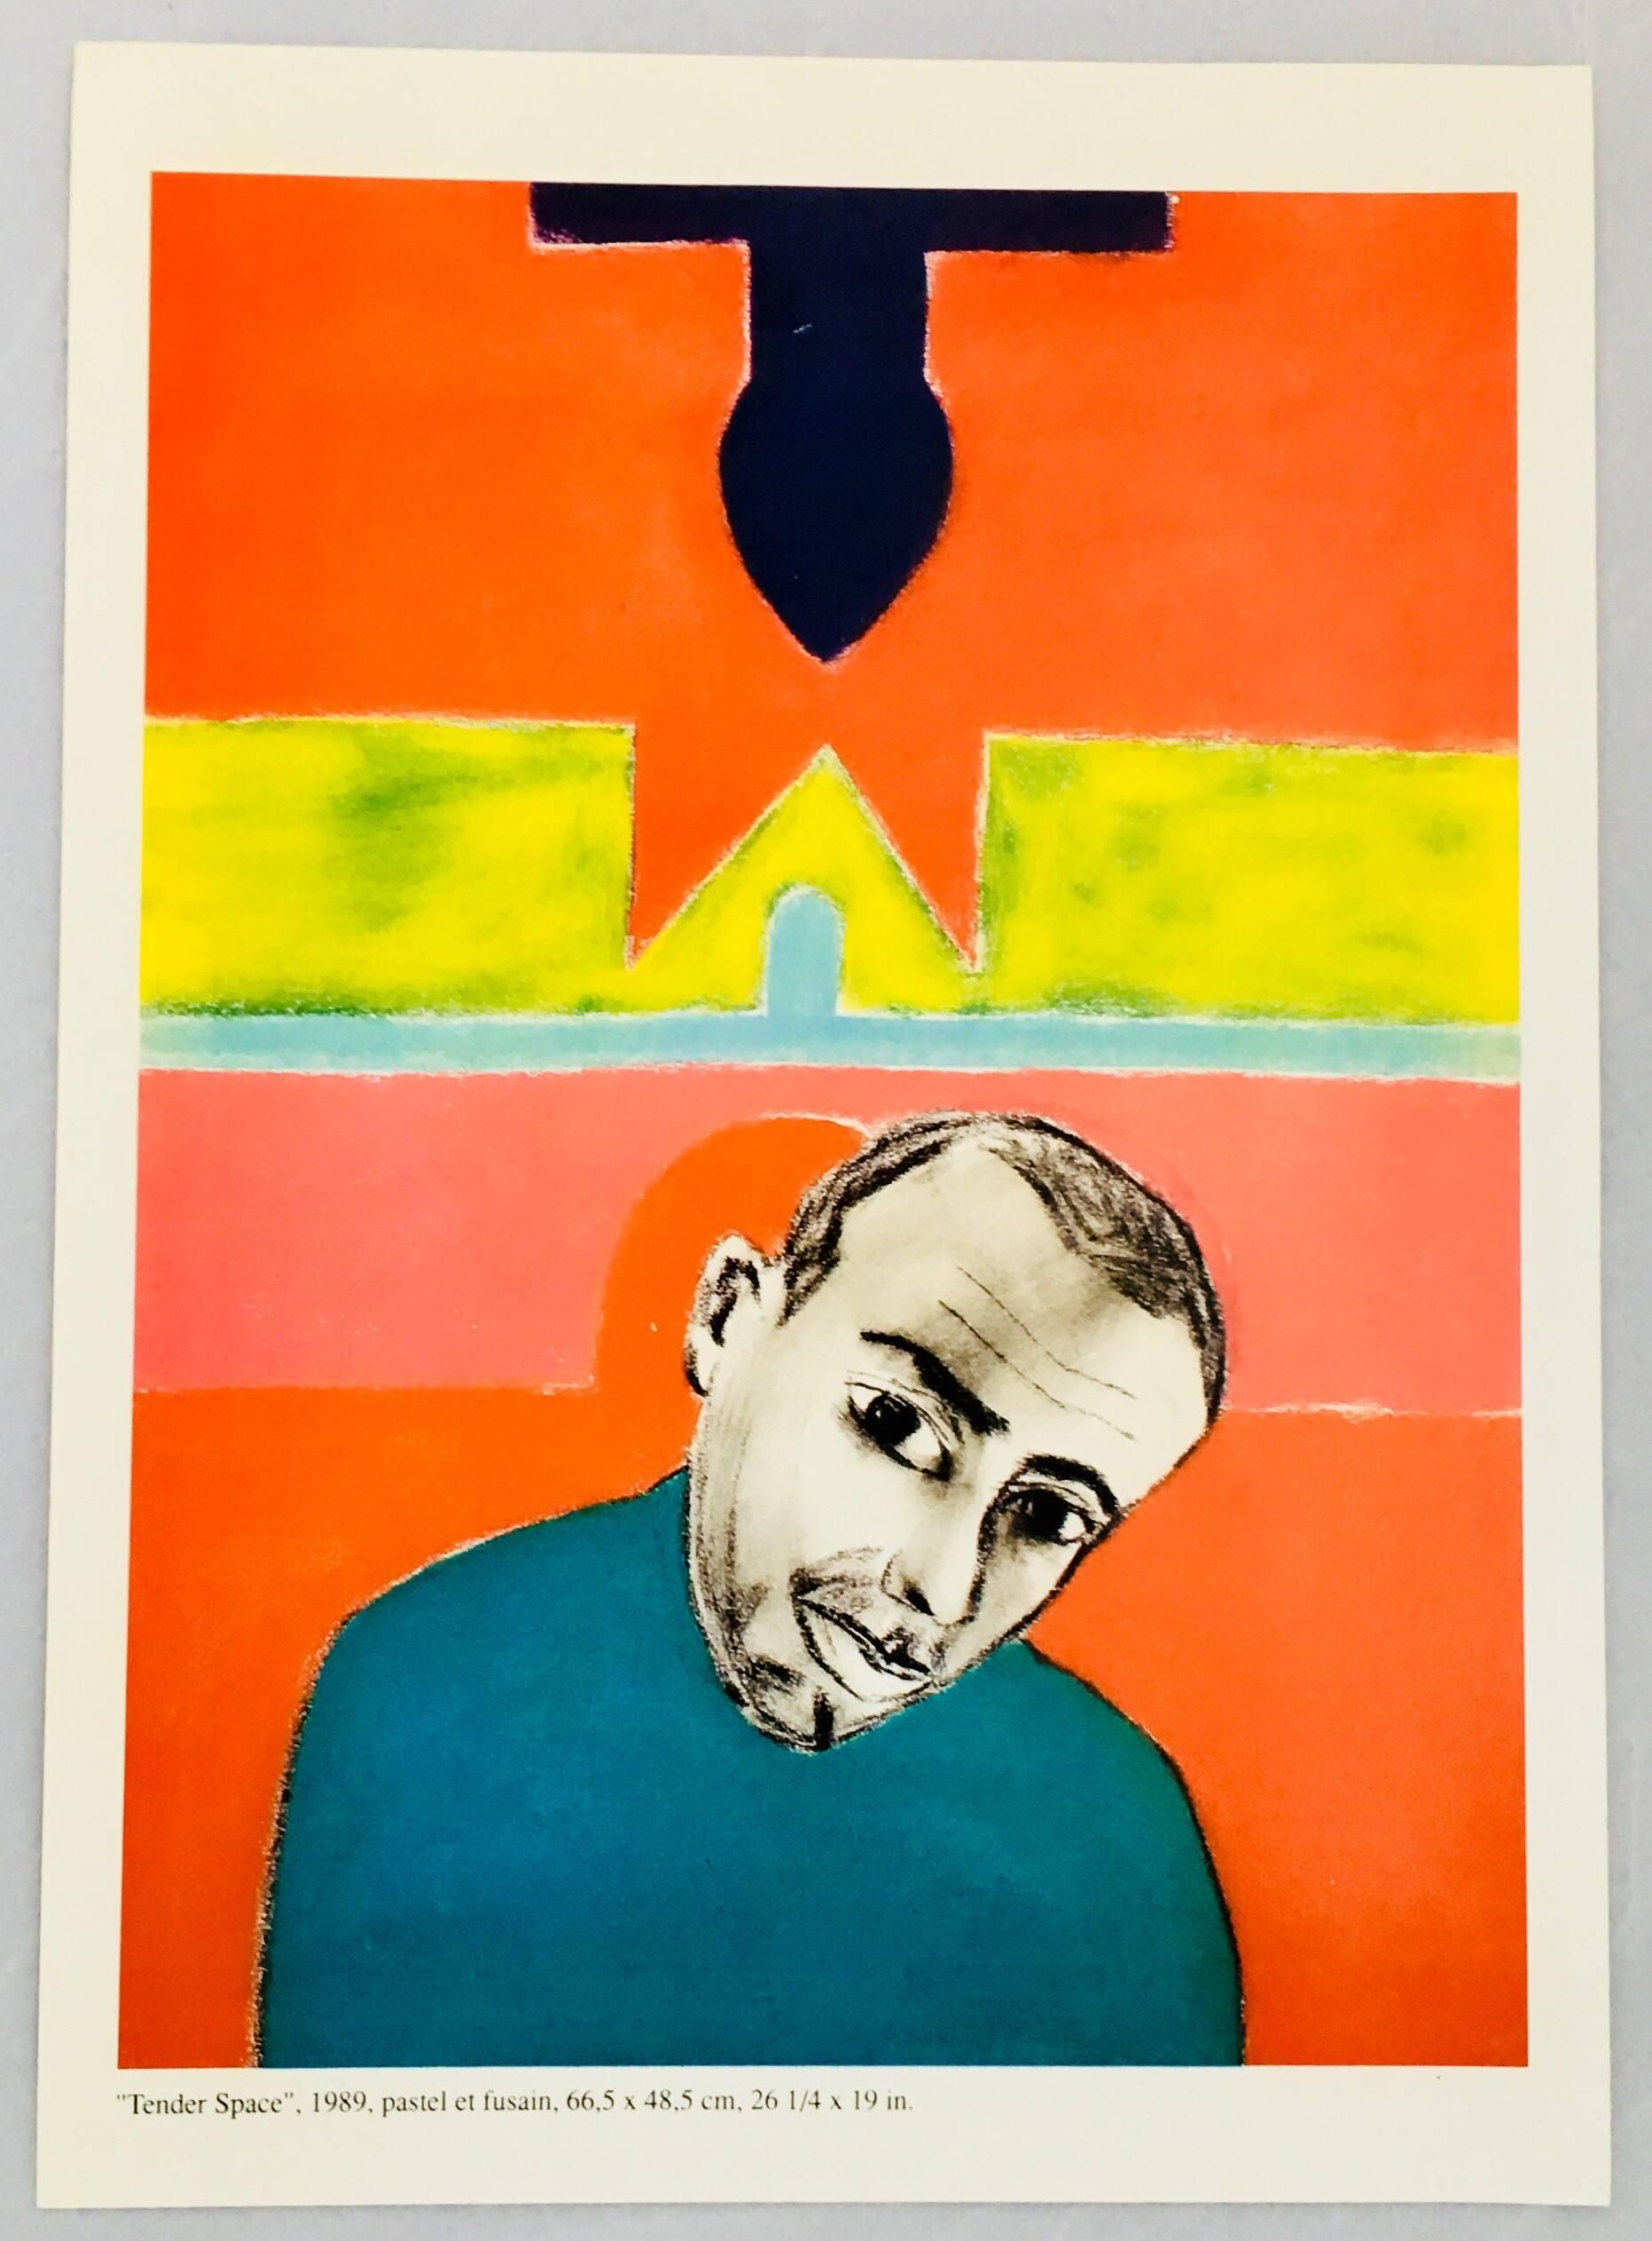 Set of two vintage Francesco Clemente gallery announcements, London, 1995 and Paris, 1991. 

Measures: Larger 6 x 7 inches
Smaller 6 x 4 inches
Very good condition 

Biography

Italian painter Francesco Clemente came to prominence in the